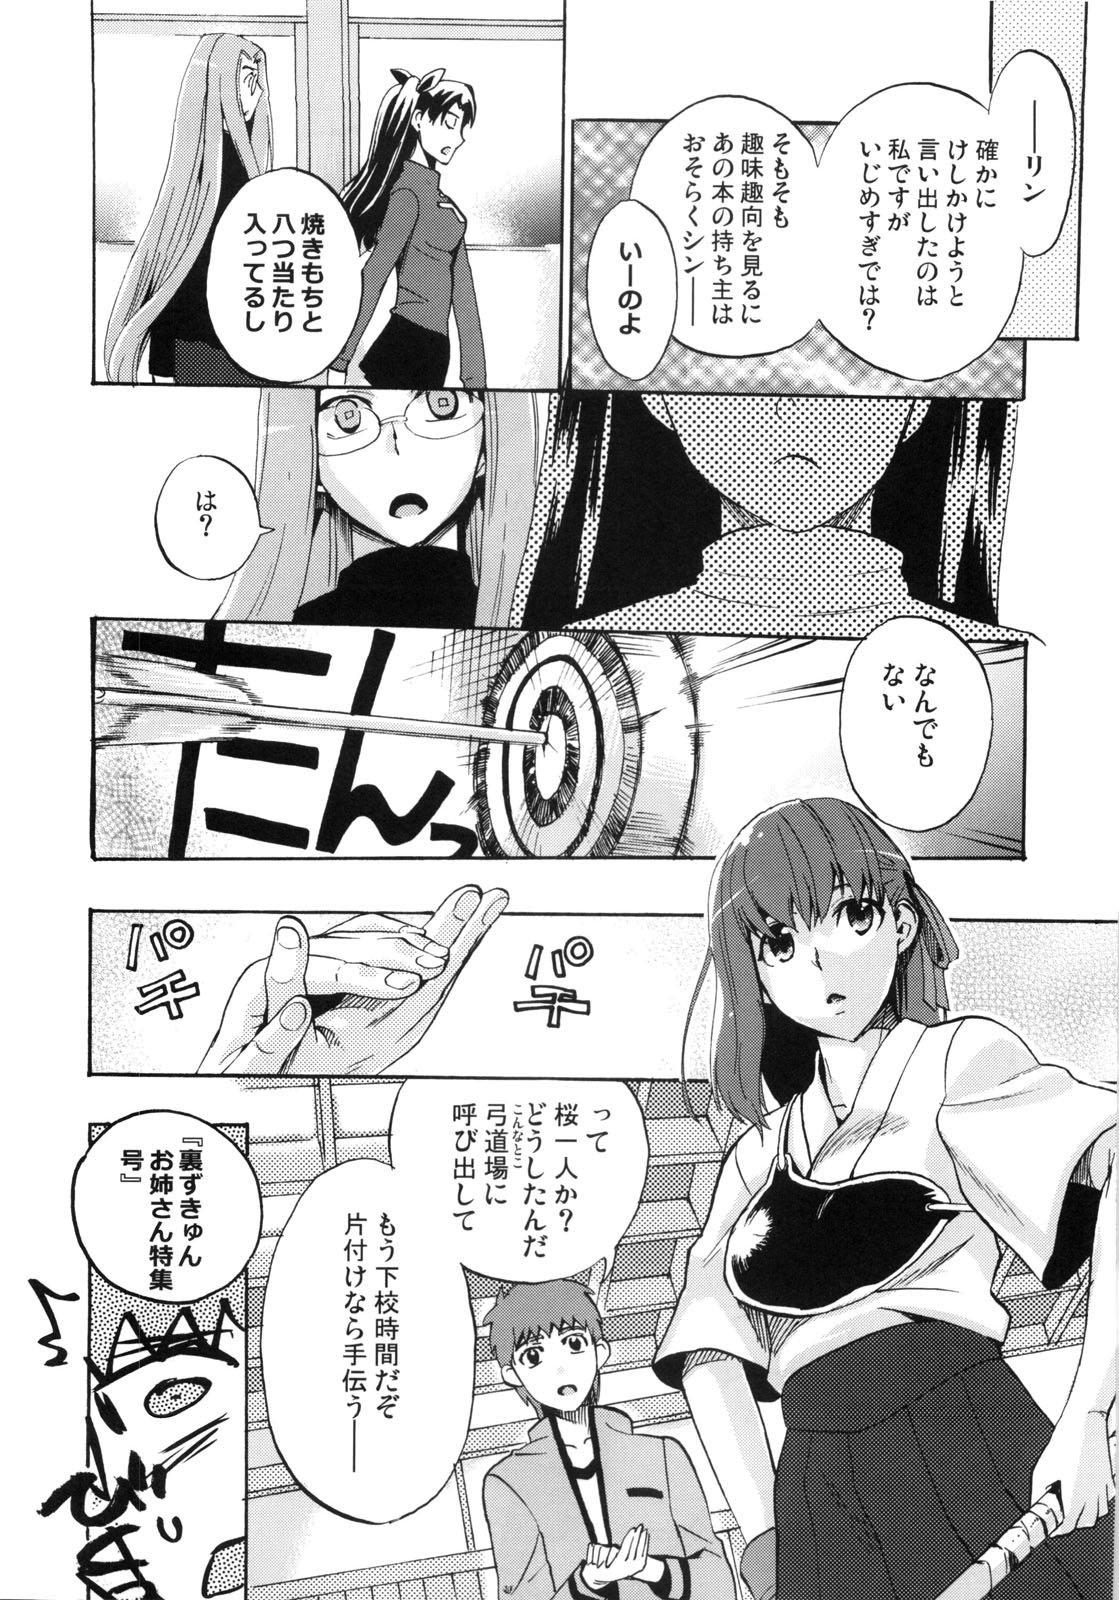 Boys cherry pie - Fate stay night Amante - Page 5